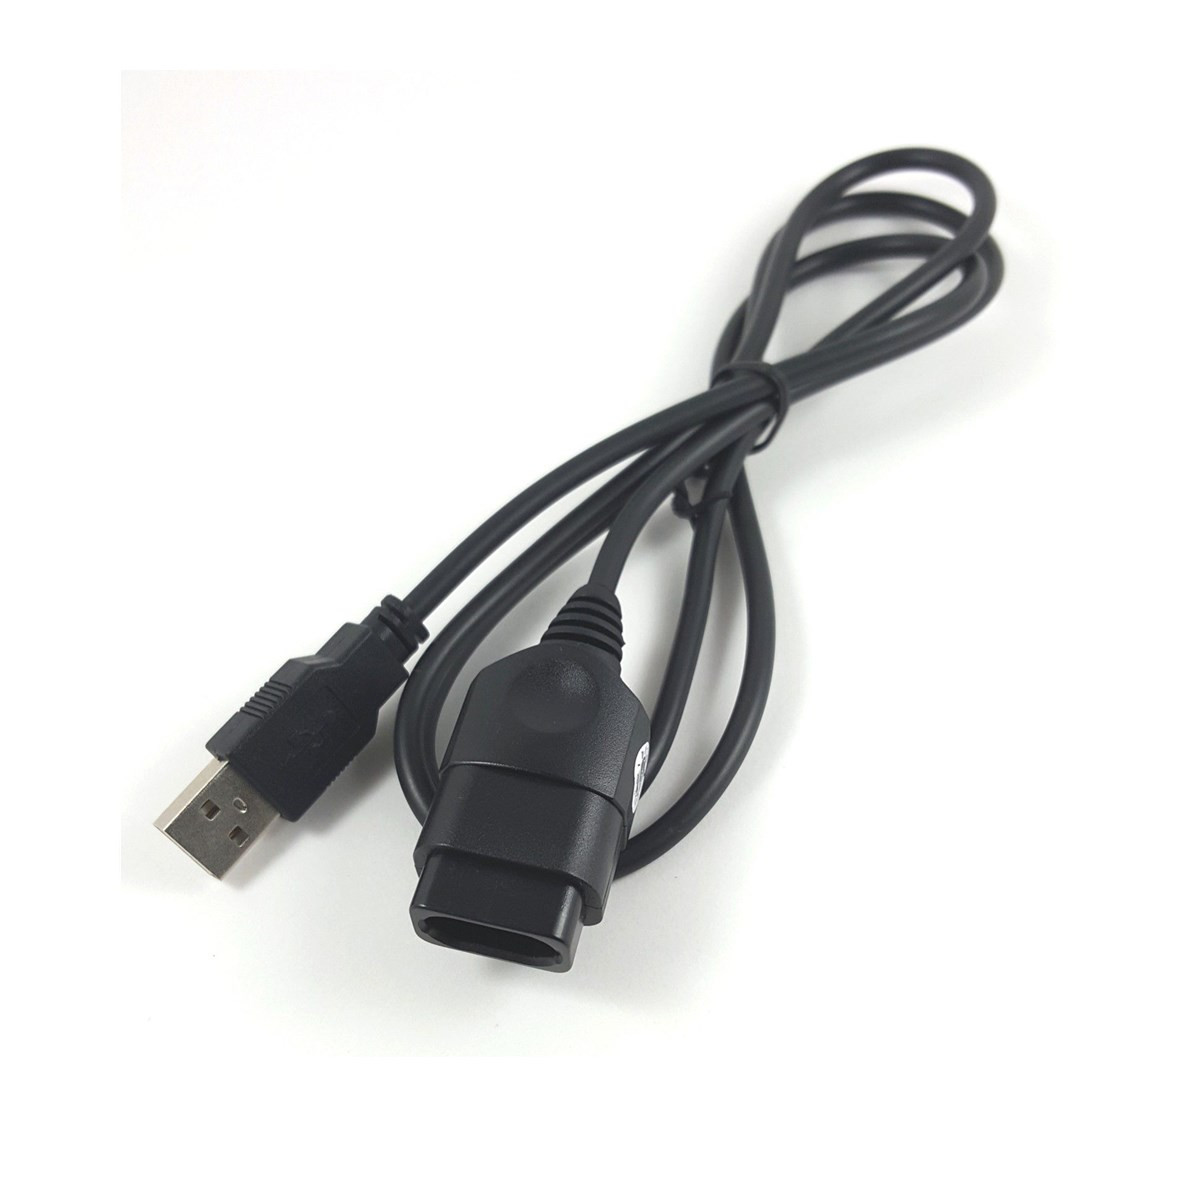 

Gamepad Controller to PC USB Converter Adapter Cable for XBOX